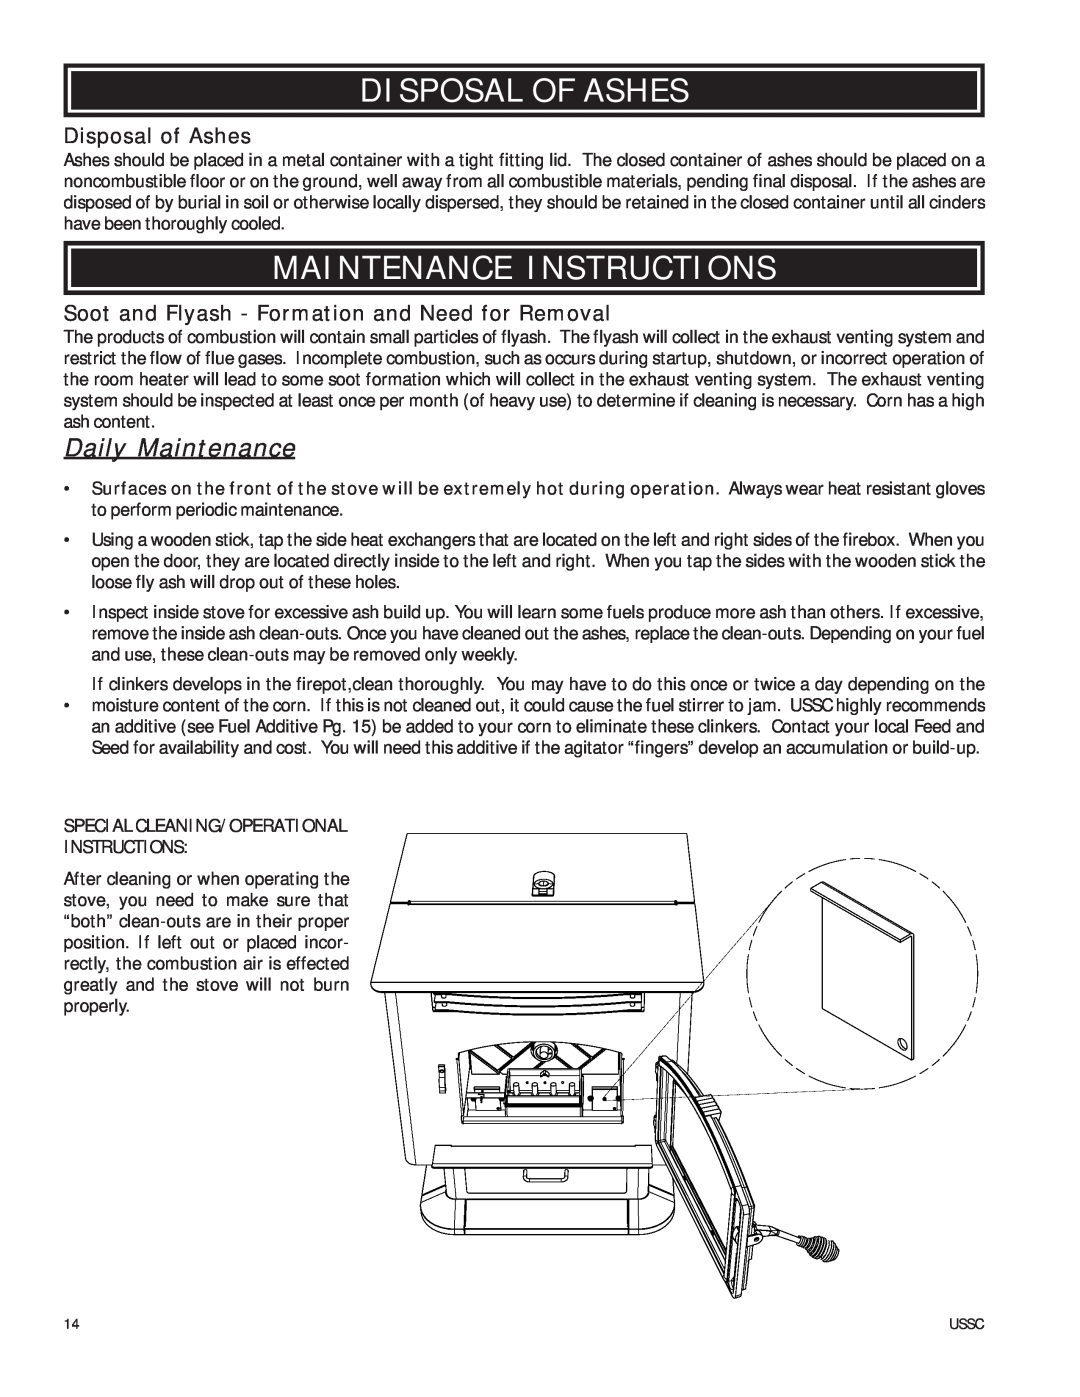 United States Stove 6039T owner manual Disposal Of Ashes, Maintenance Instructions, Daily Maintenance, Disposal of Ashes 